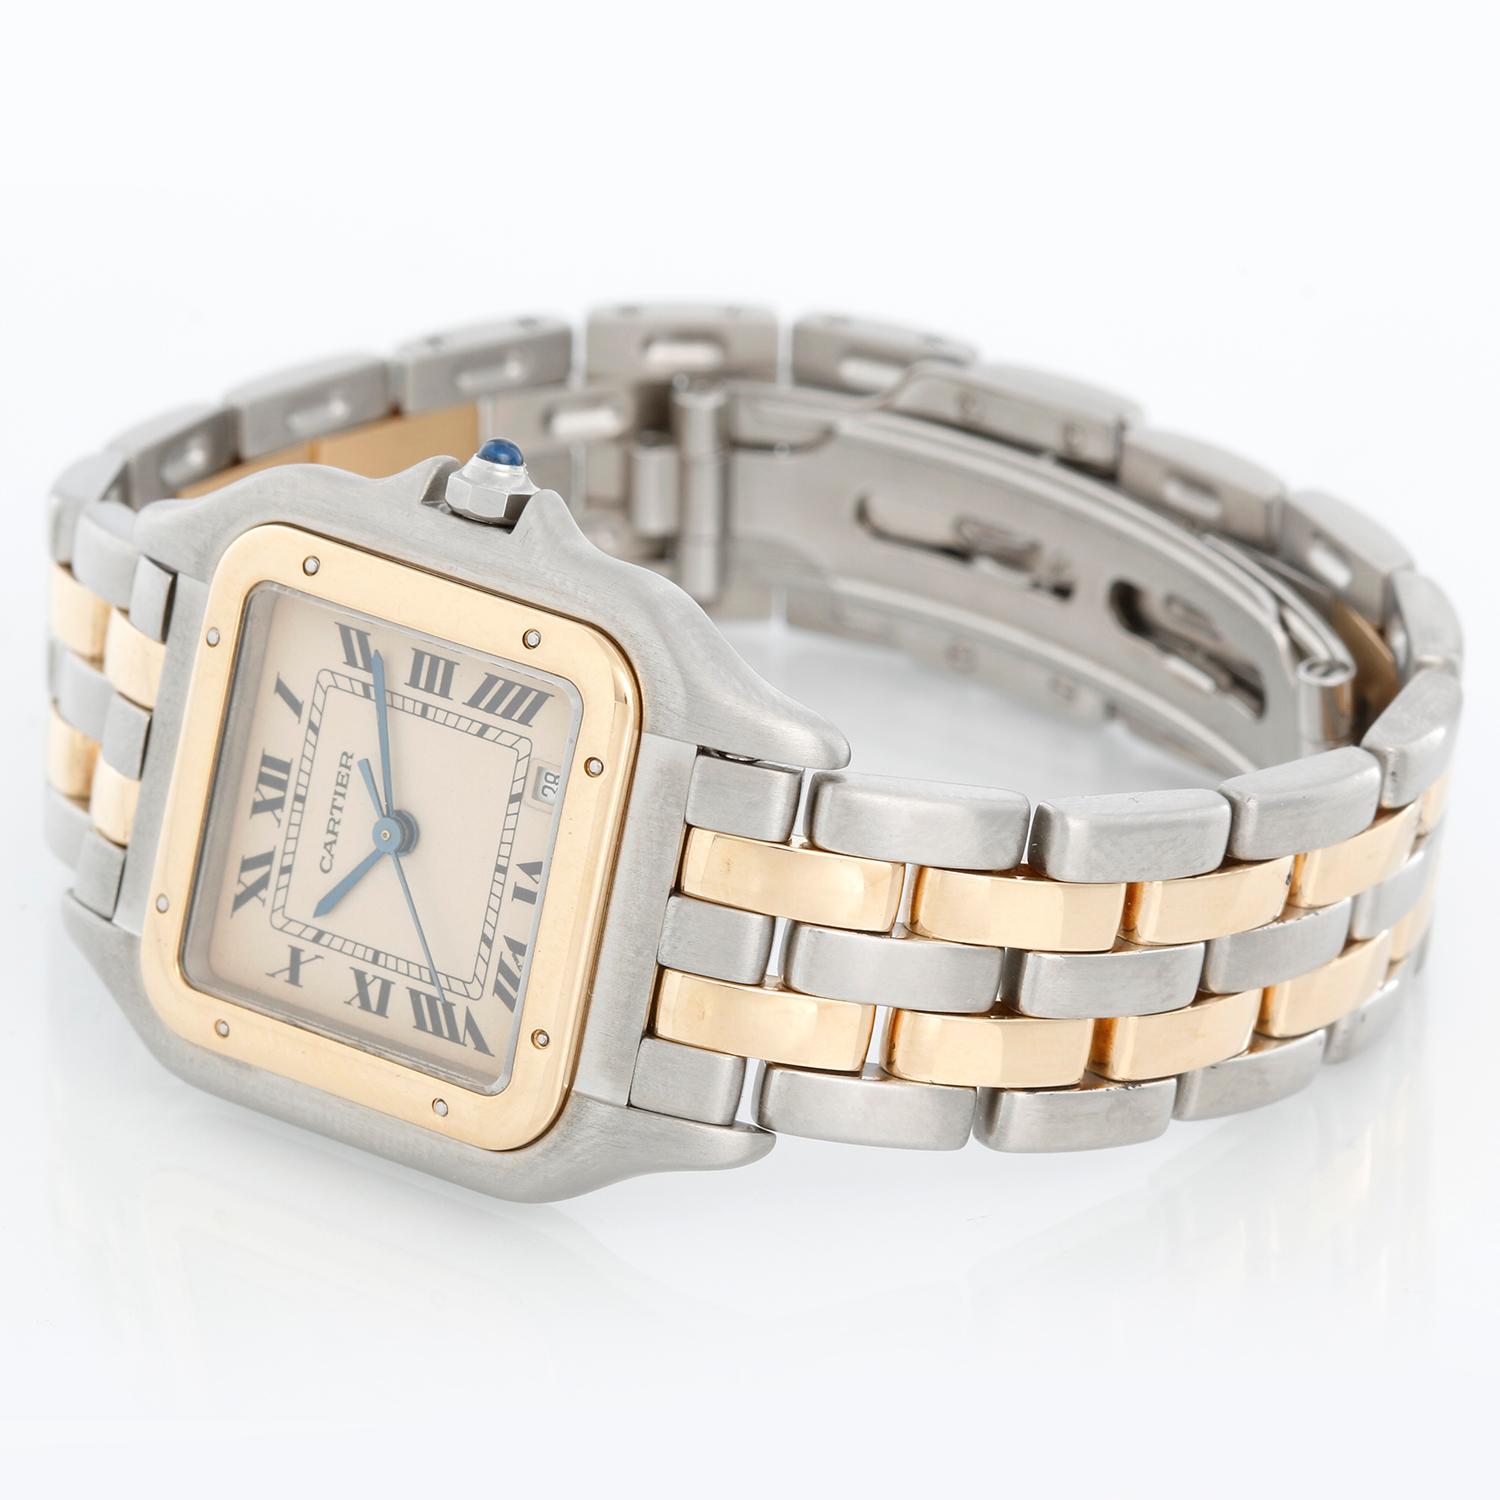 Cartier Panther Midsize 2-Tone  2-Row Steel & Gold Watch - Quartz. Stainless steel case with 18k yellow gold bezel (26mm x 36mm). Ivory colored dial with black Roman numerals date at 5 o'clock. Stainless steel and 2-row 18k yellow gold Panthere